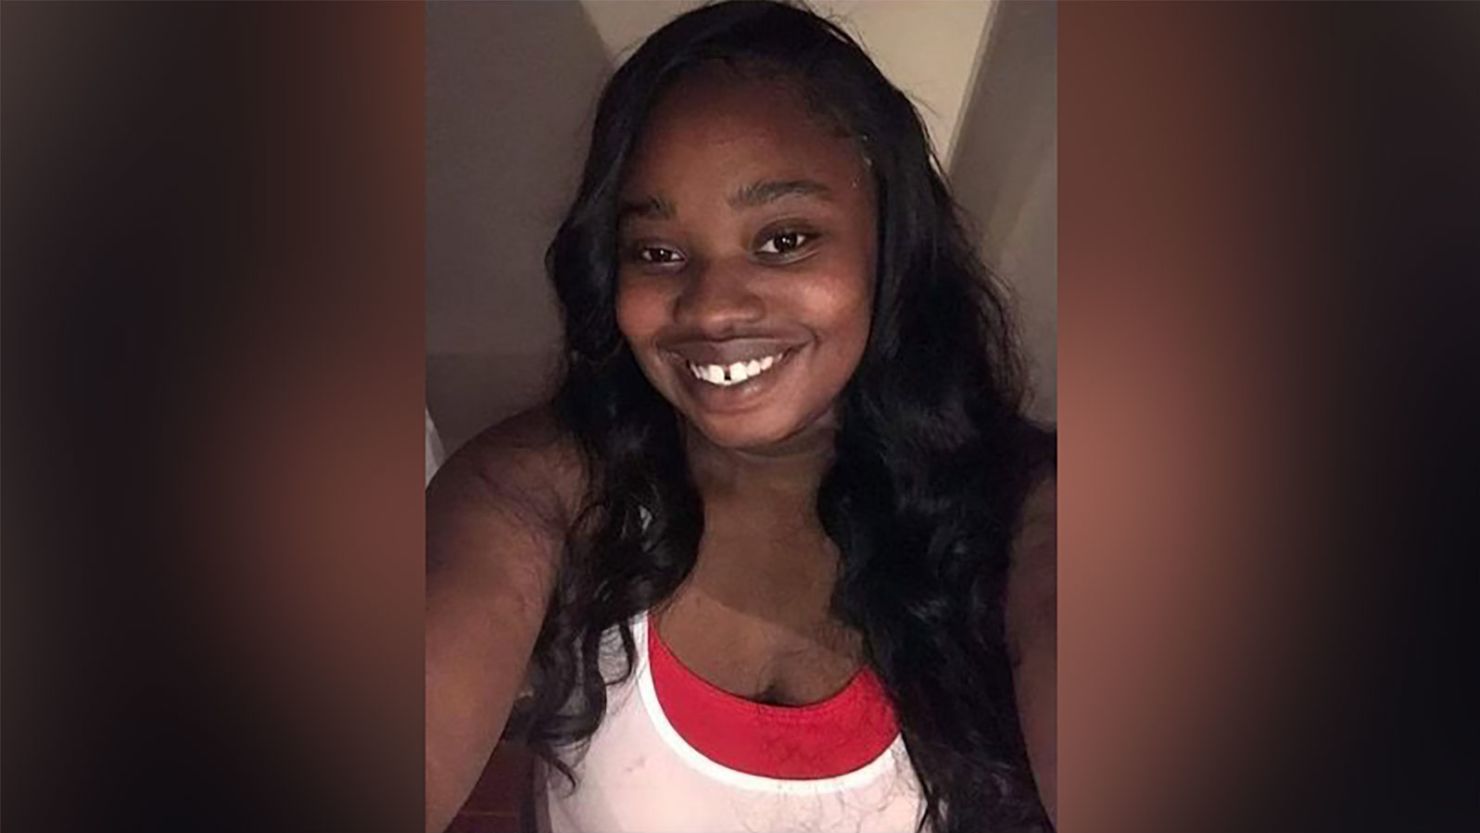 Brianna Grier, 28, died while in police custody in Georgia.